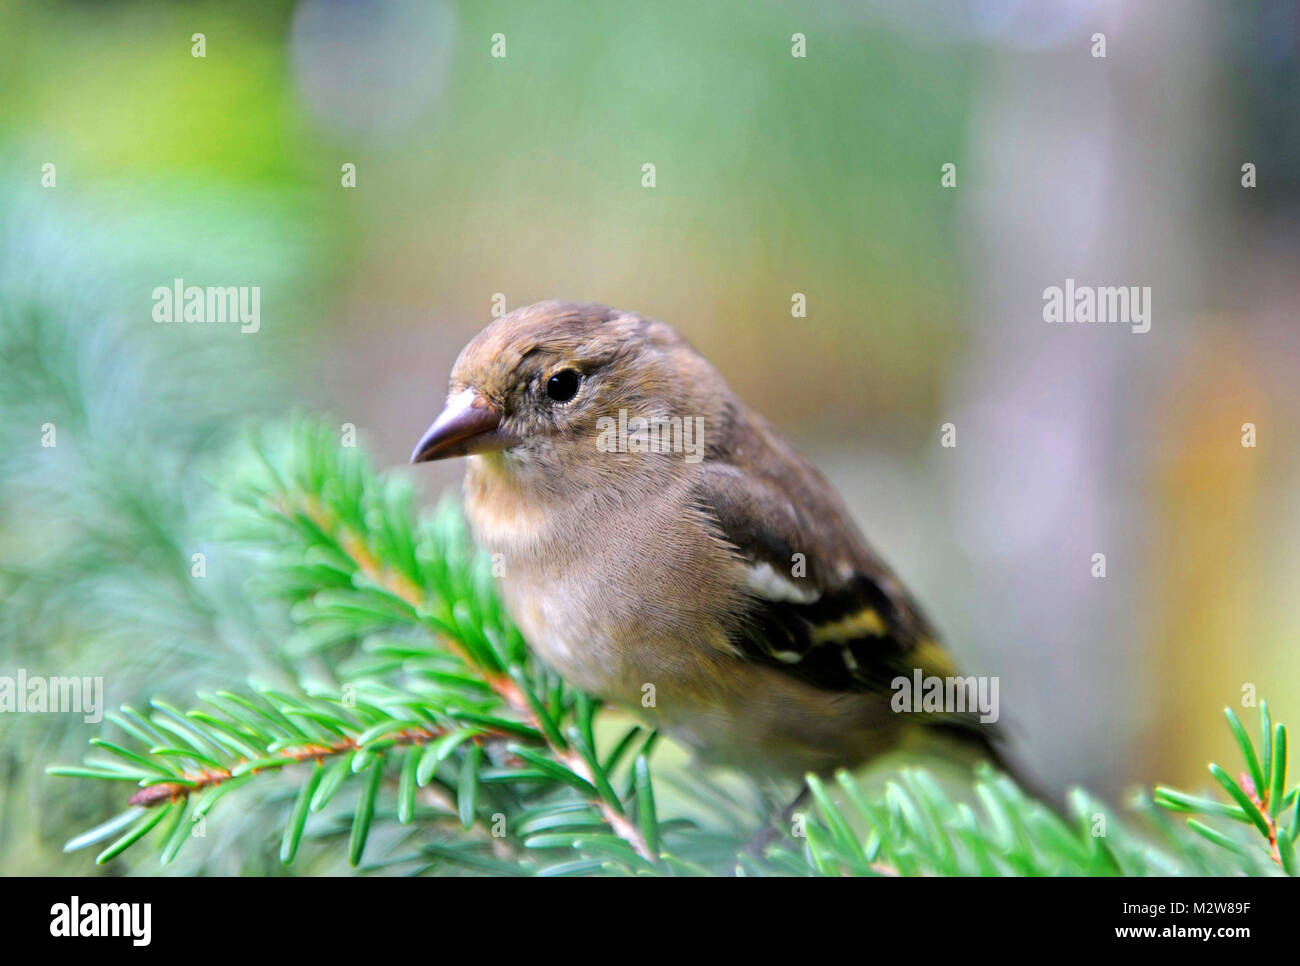 Greenfinch or Eurasian greenfinch, Carduelis chloris, on search for food in the spruce forest Stock Photo